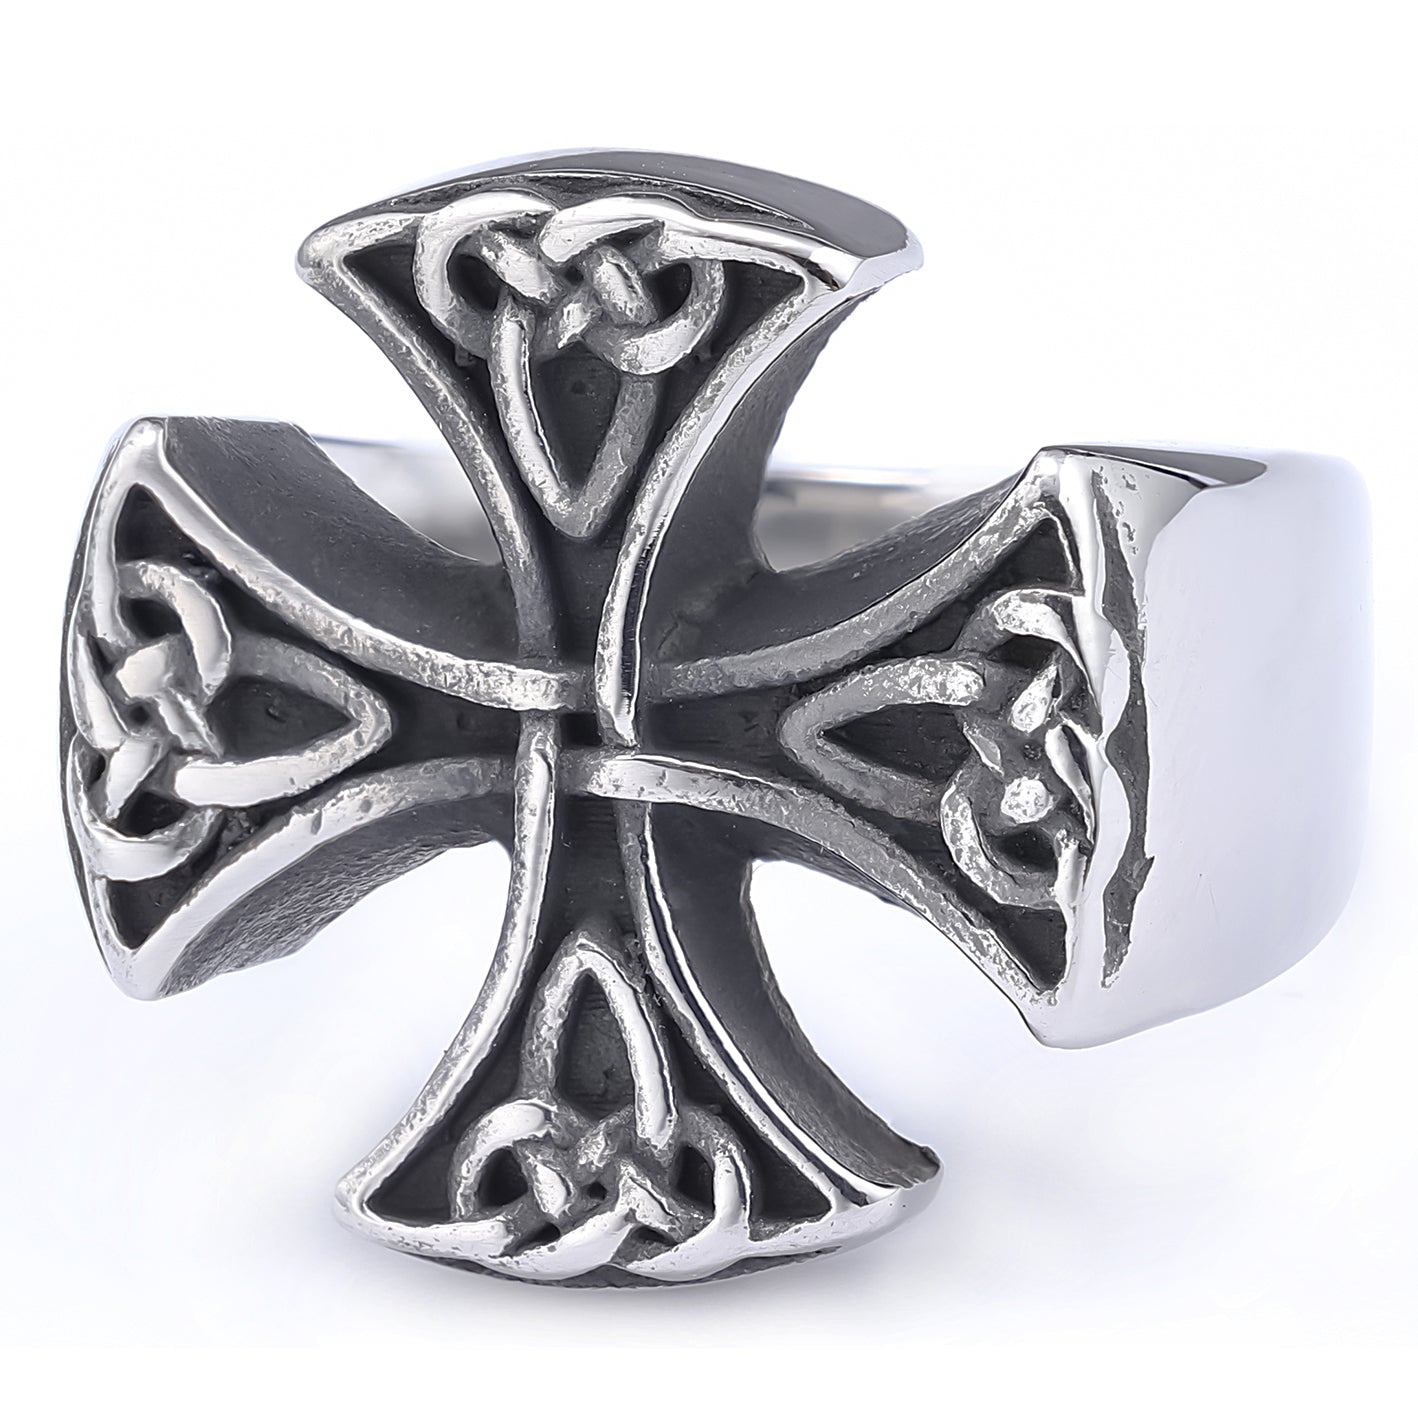 Equal-armed Celtic Knot Cross Ring